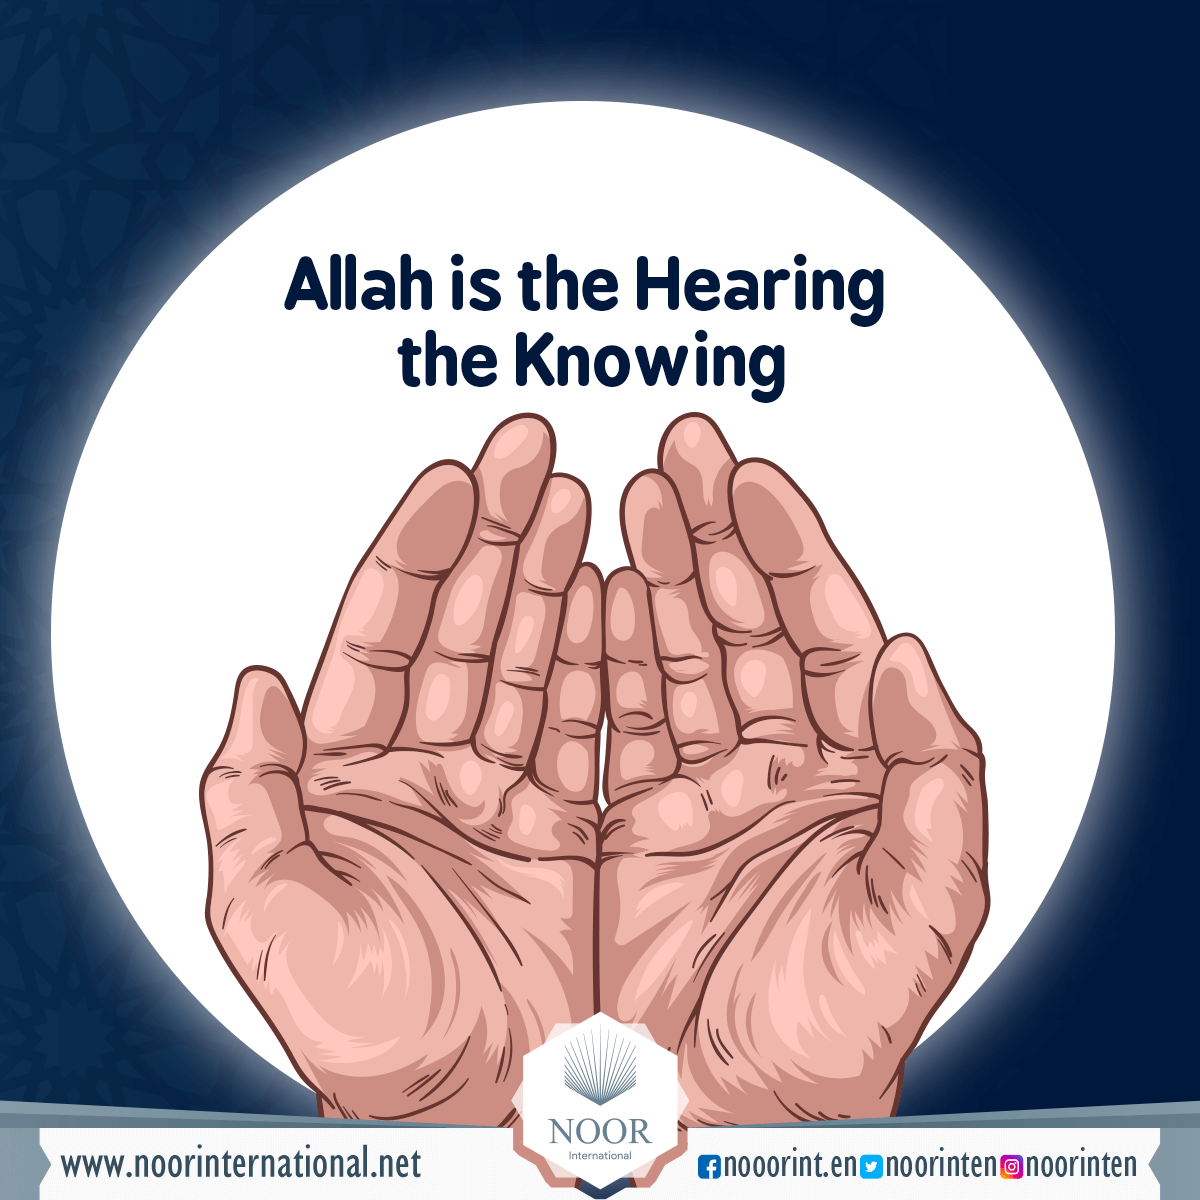 Allah is the Hearing, the Knowing